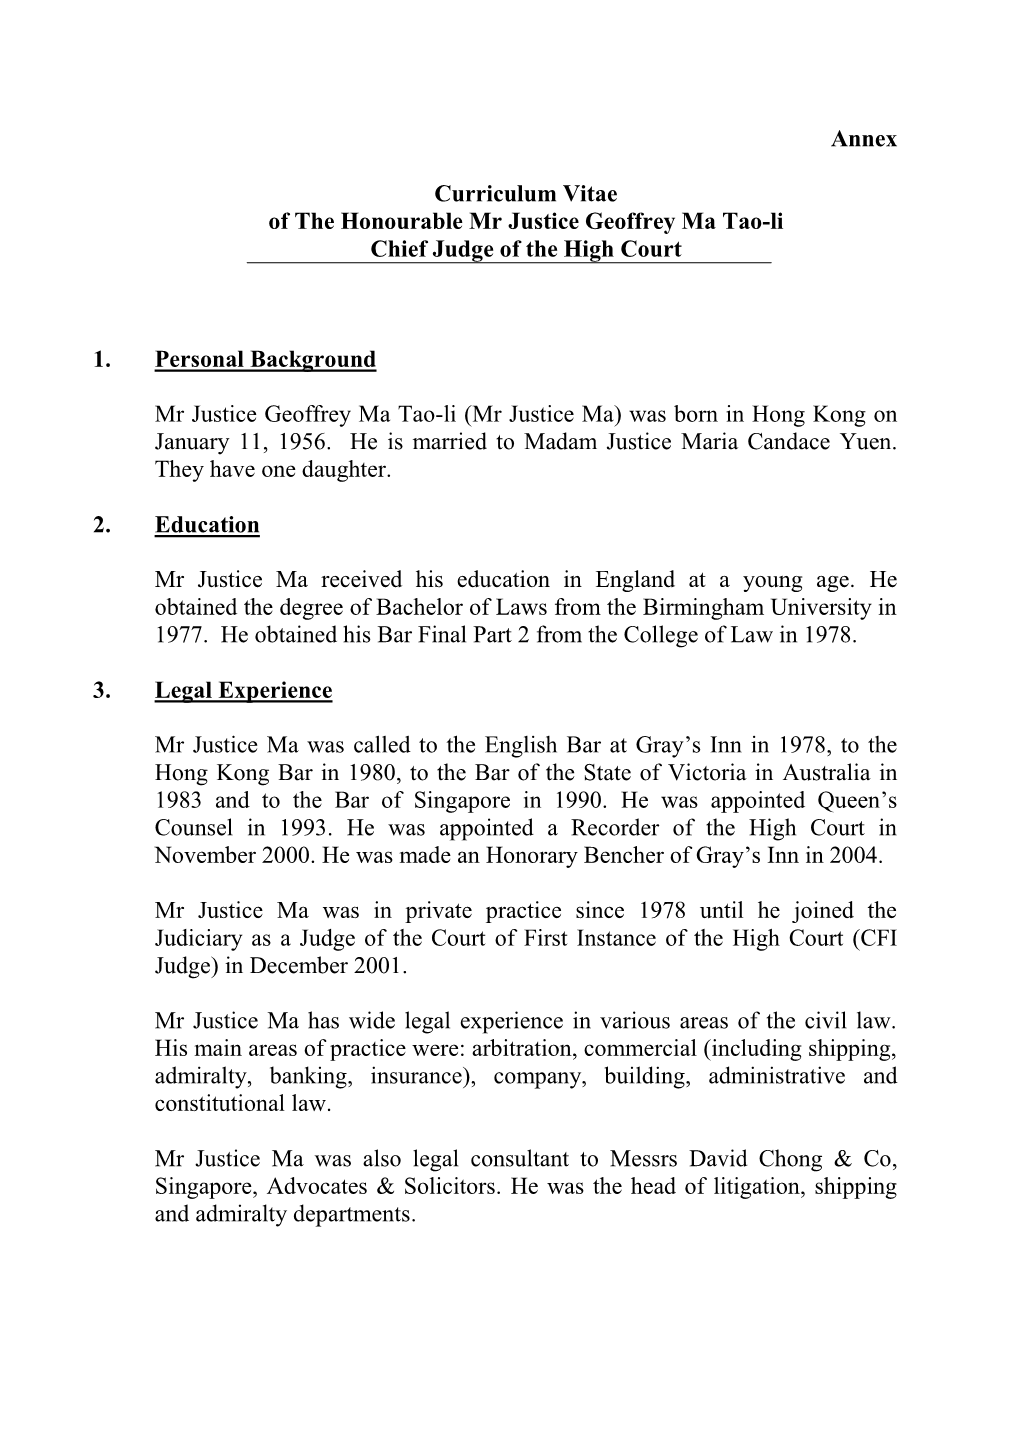 Annex Curriculum Vitae of the Honourable Mr Justice Geoffrey Ma